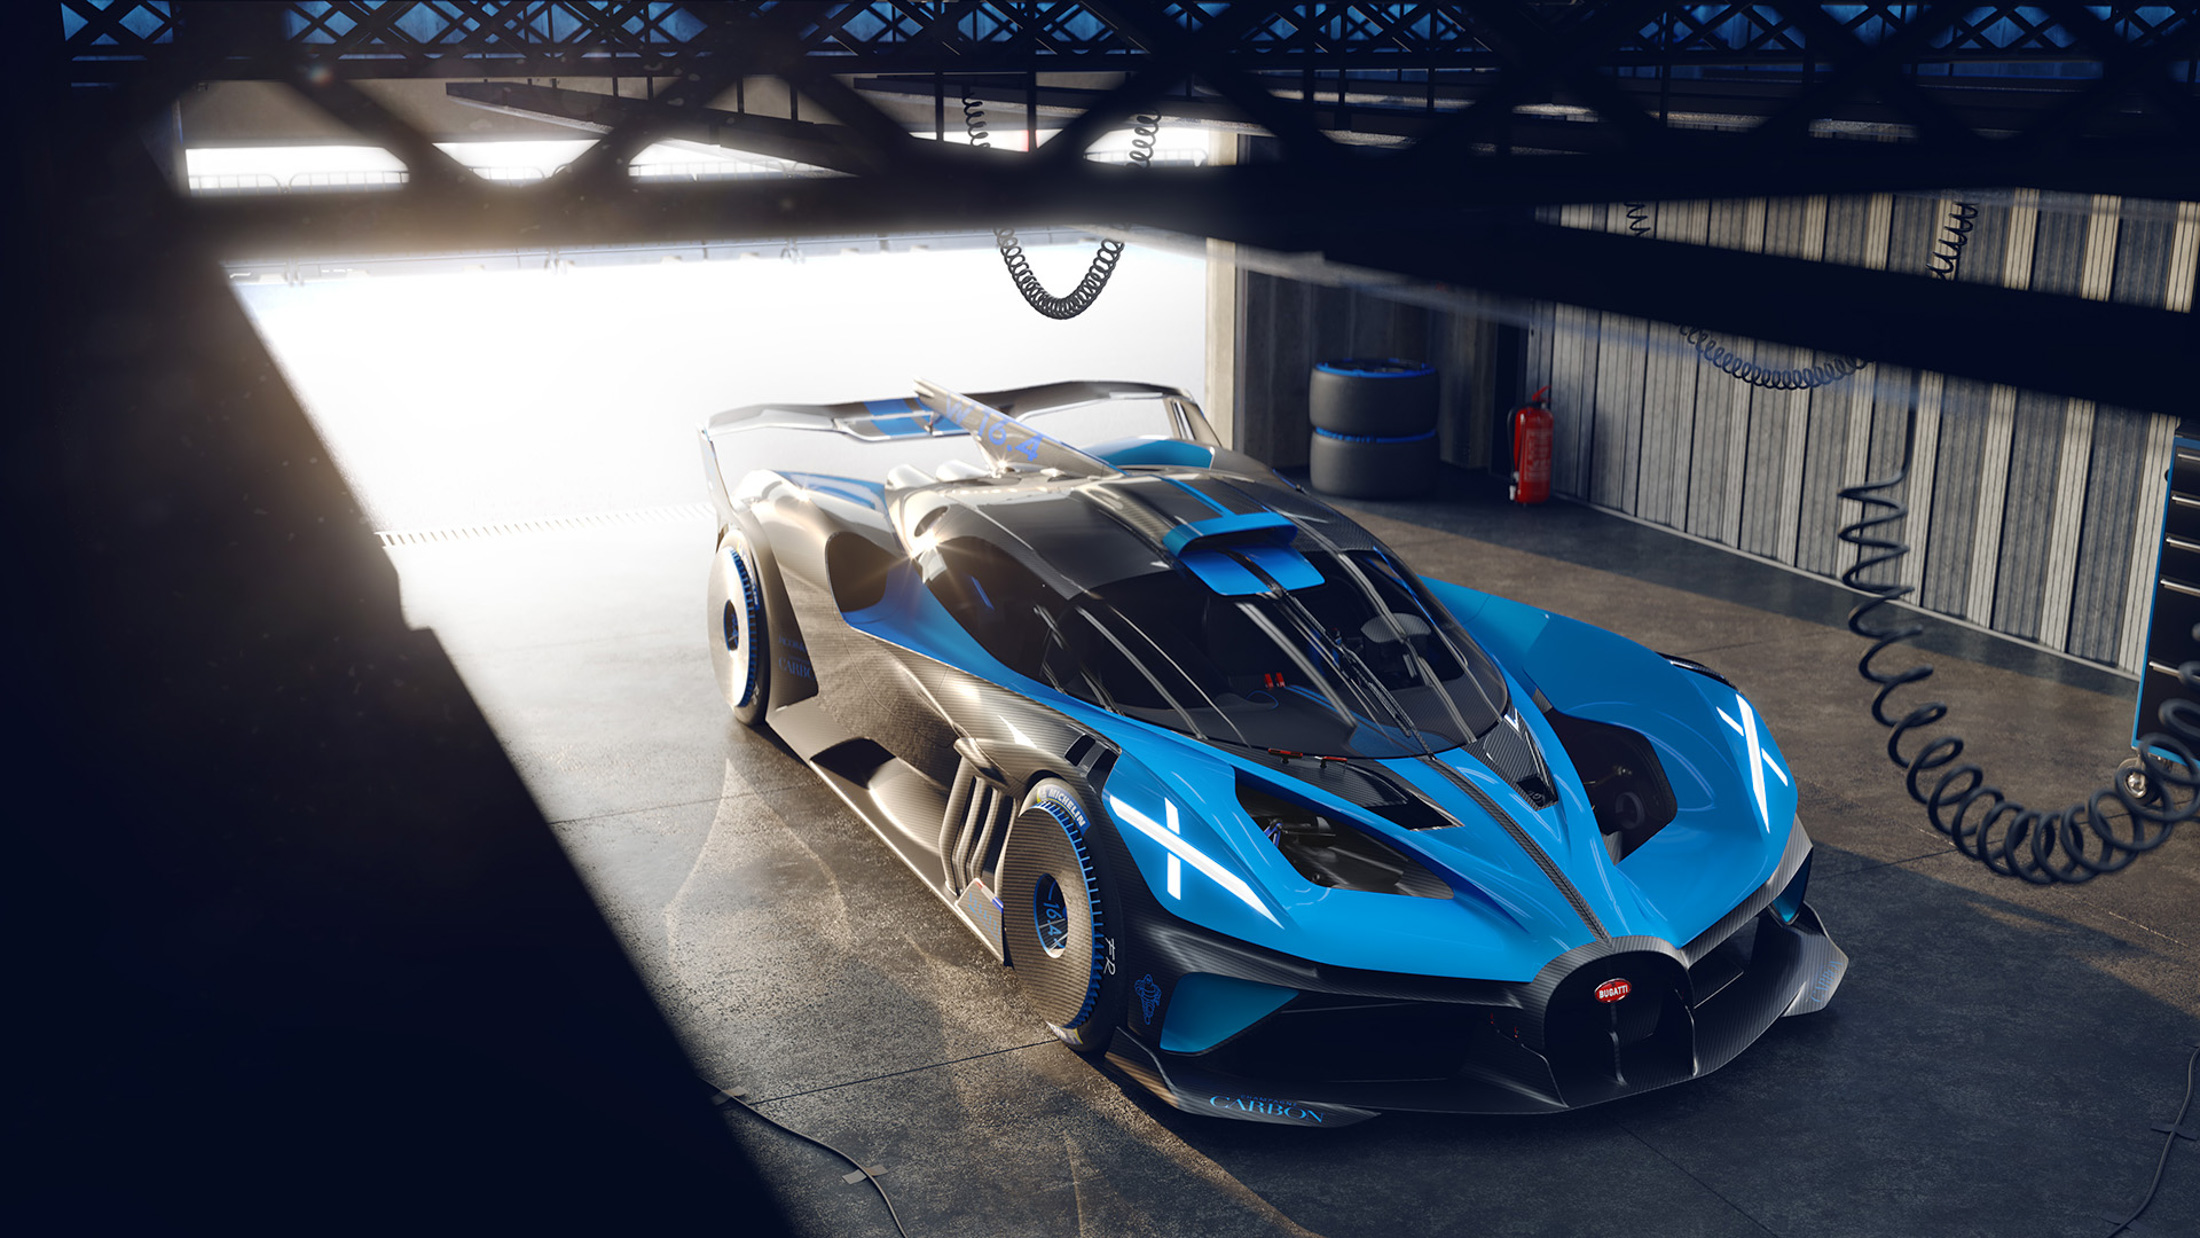 The new Bugatti Bolide (seen in a computer-generated image) is an&nbsp;“experimental study” set for the track.